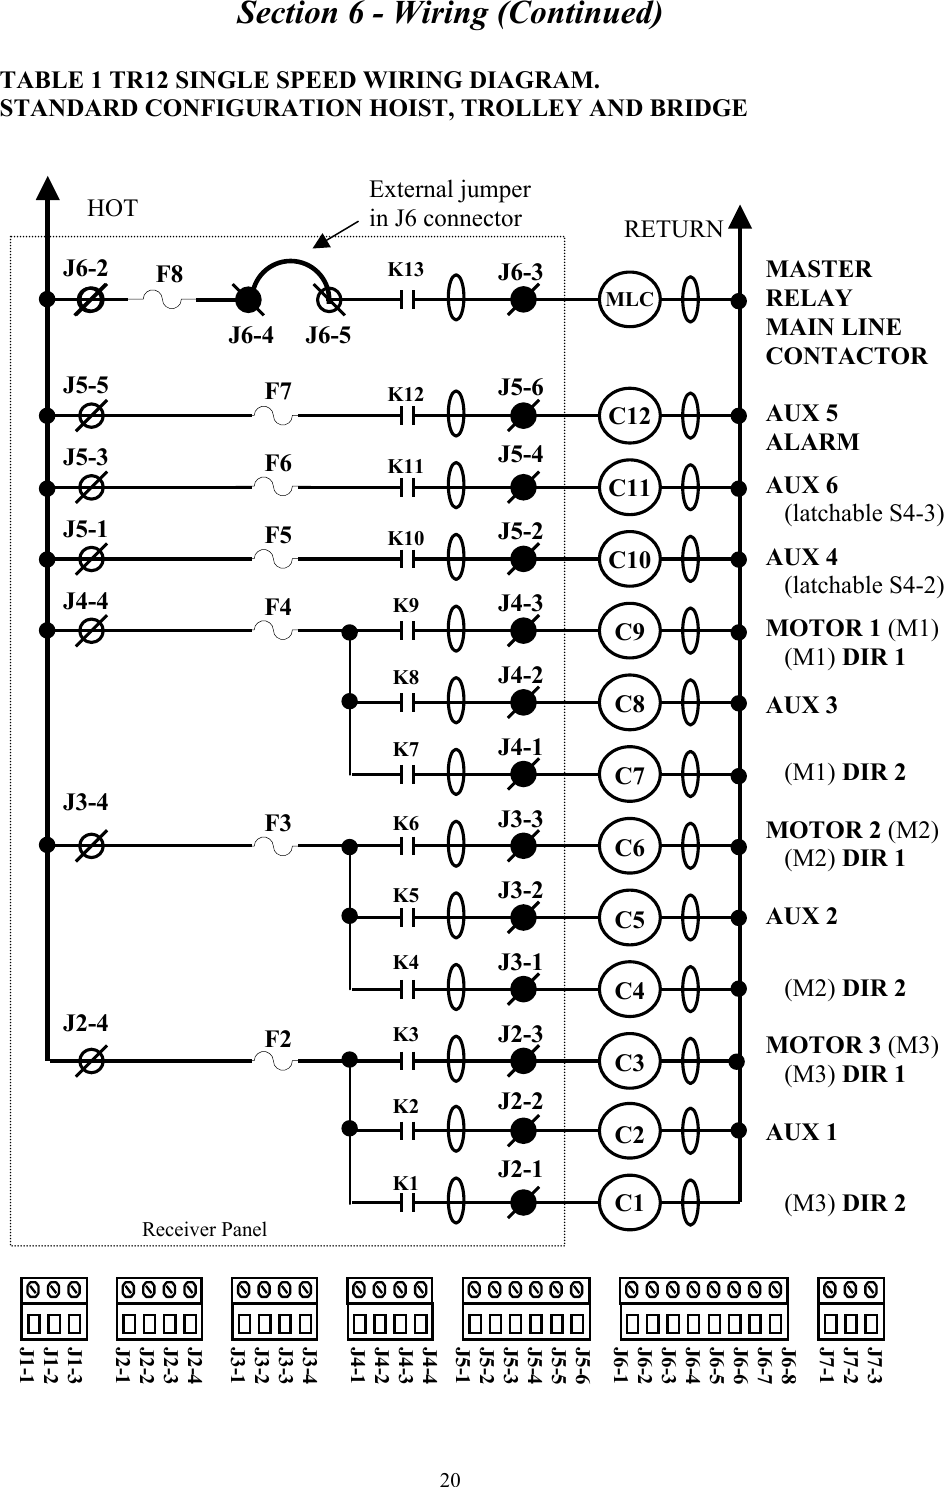 Section 6 - Wiring (Continued) 20 TABLE 1 TR12 SINGLE SPEED WIRING DIAGRAM. STANDARD CONFIGURATION HOIST, TROLLEY AND BRIDGE   MASTER  RELAY MAIN LINE CONTACTOR  AUX 5 ALARM  AUX 6     (latchable S4-3)  AUX 4     (latchable S4-2)  MOTOR 1 (M1)    (M1) DIR 1  AUX 3      (M1) DIR 2  MOTOR 2 (M2)    (M2) DIR 1  AUX 2     (M2) DIR 2  MOTOR 3 (M3)    (M3) DIR 1  AUX 1     (M3) DIR 2       Receiver Panel J6-2    J5-5  J5-3  J5-1  J4-4      J3-4        J2-4 J6-3    J5-6  J5-4   J5-2  J4-3  J4-2  J4-1  J3-3  J3-2  J3-1  J2-3  J2-2  J2-1 HOT  RETURN K13     K12   K11   K10   K9   K8   K7   K6   K5   K4   K3   K2   K1 MLC    C12  C11  C10  C9  C8  C7  C6  C5  C4  C3  C2  C1     F7  F6  F5  F4      F3        F2  J7-3 J7-2 J7-1  J6-8 J6-7 J6-6 J6-5 J6-4 J6-3 J6-2 J6-1   J5-6 J5-5 J5-4 J5-3 J5-2 J5-1  J4-4 J4-3 J4-2 J4-1  J3-4 J3-3 J3-2 J3-1  J2-4 J2-3 J2-2 J2-1  J1-3 J1-2 J1-1 External jumper in J6 connector J6-4     J6-5 F8 